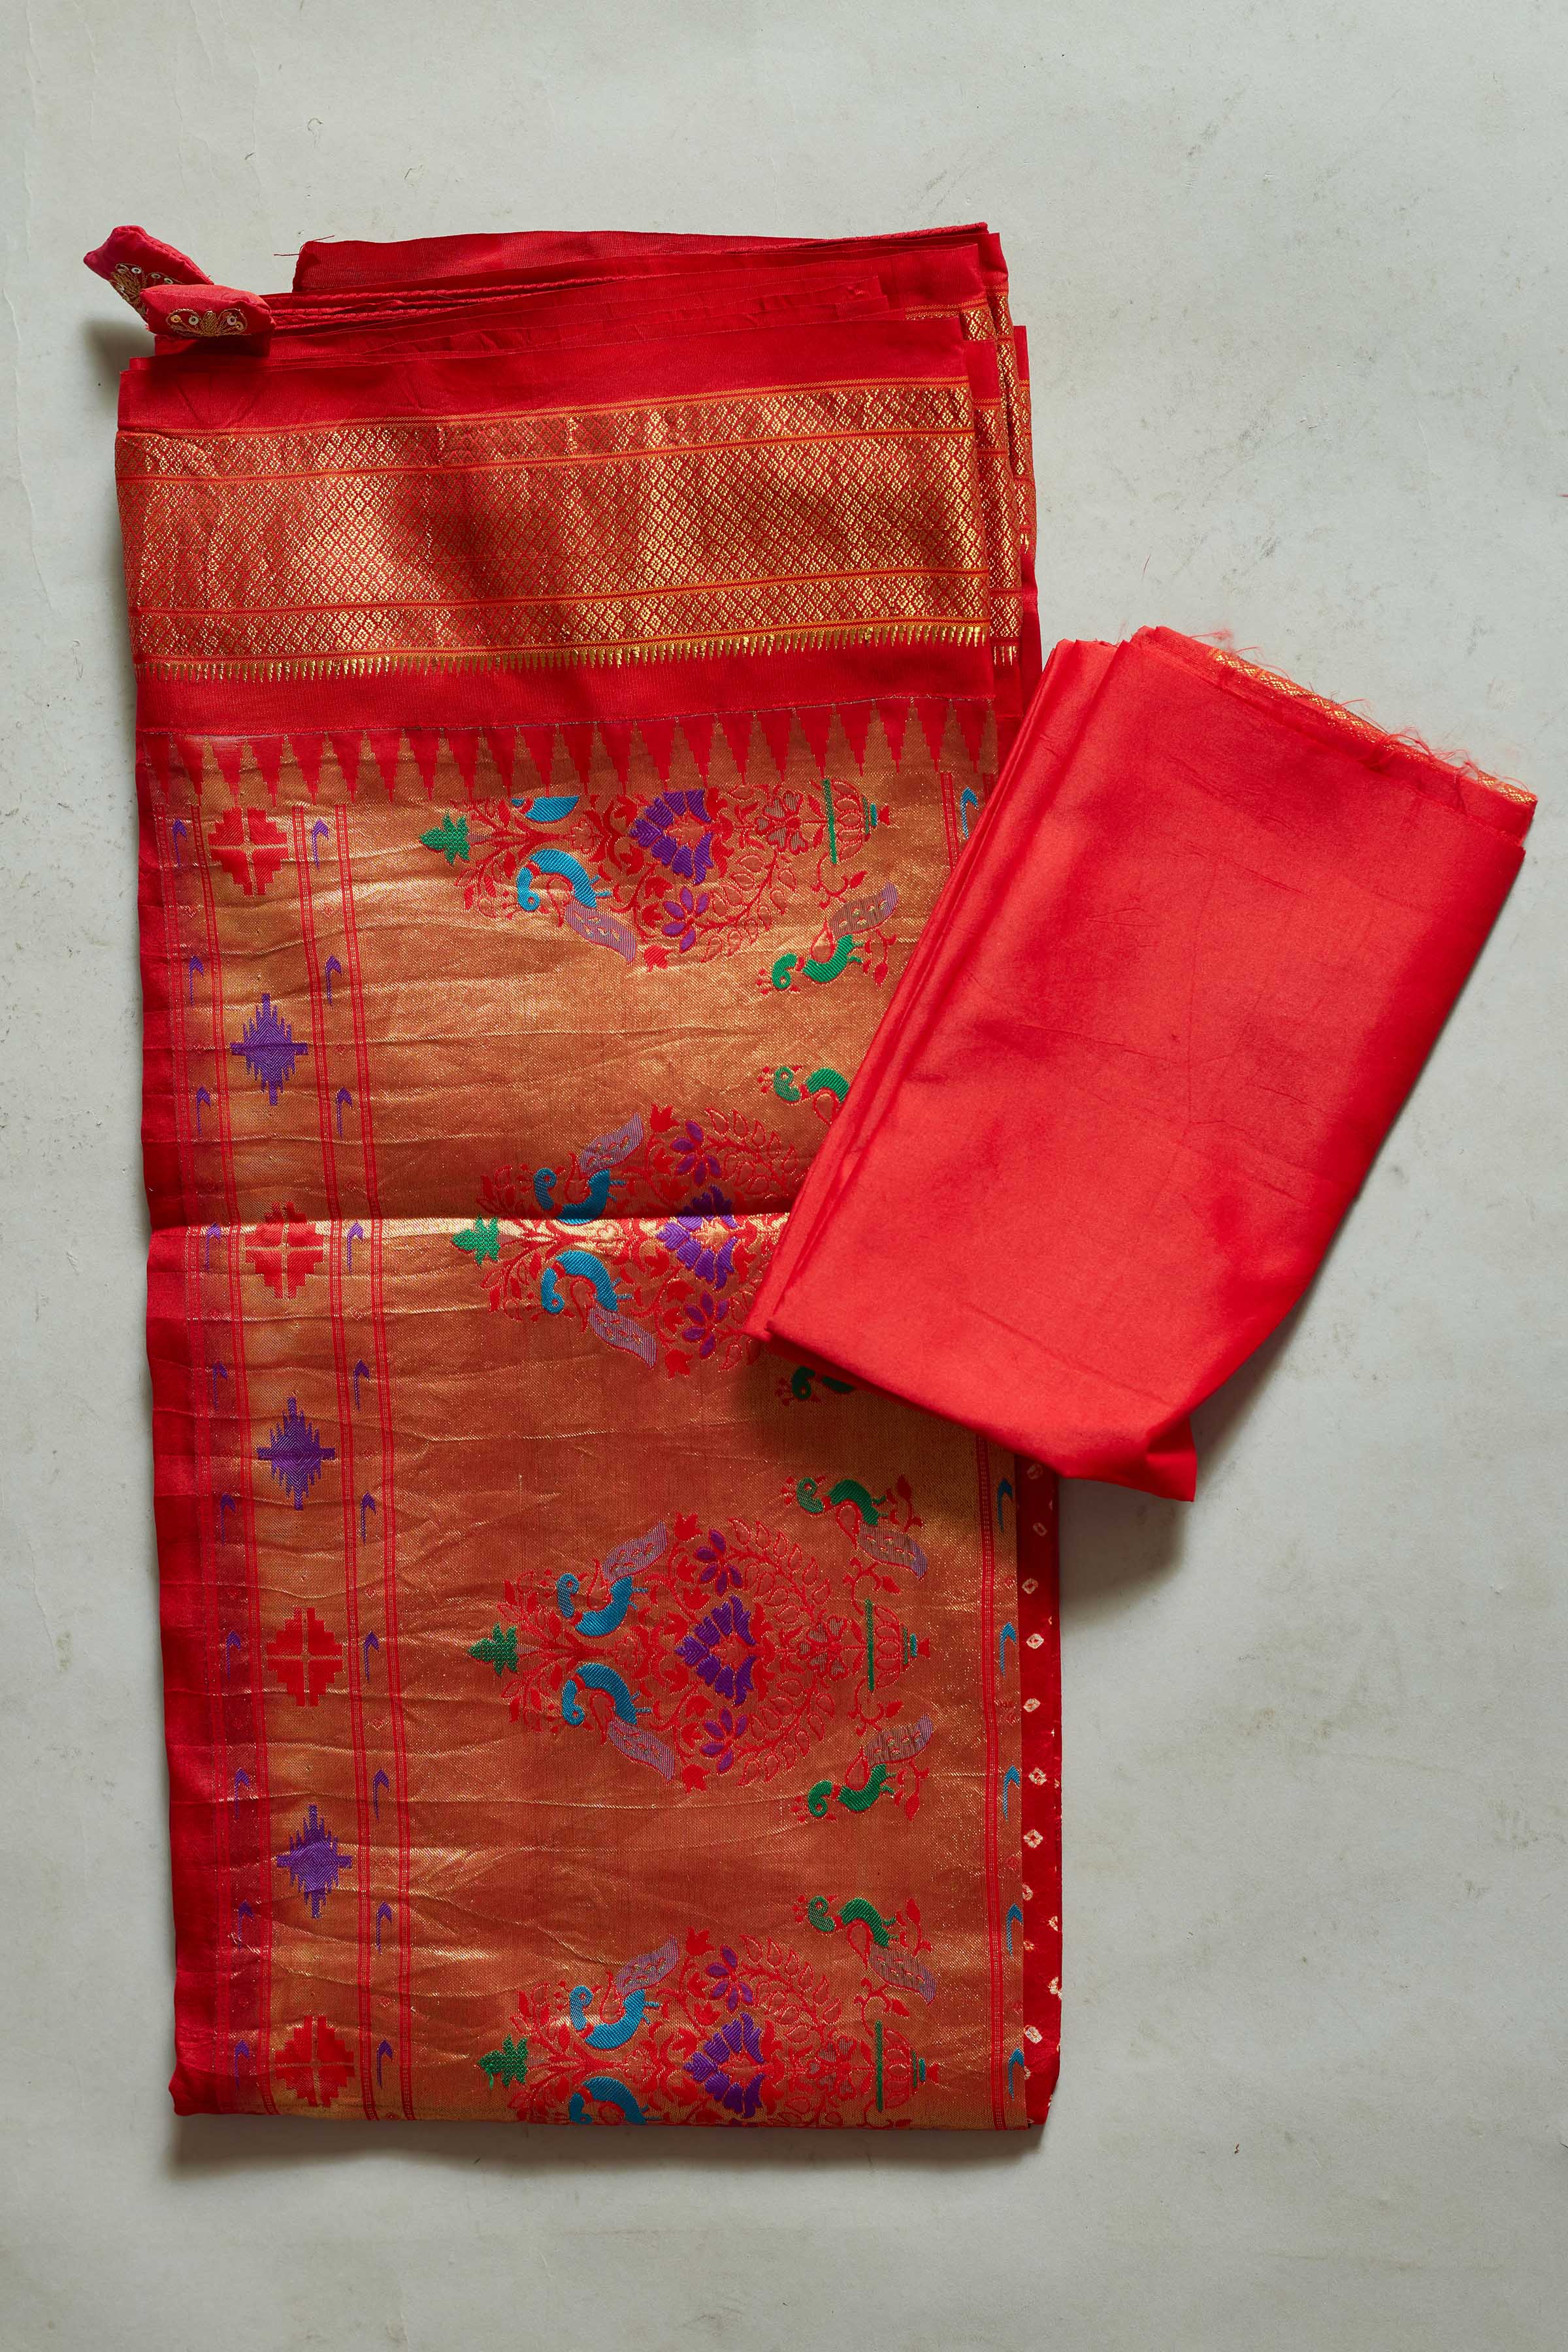 Shop red bandhej Kanjivaram silk sari online in USA with Paithani pallu. Look your best on festive occasions in latest designer sarees, pure silk sarees, Kanjivaram silk saris, handwoven saris, tussar silk sarees, embroidered saris from Pure Elegance Indian clothing store in USA.-blouse